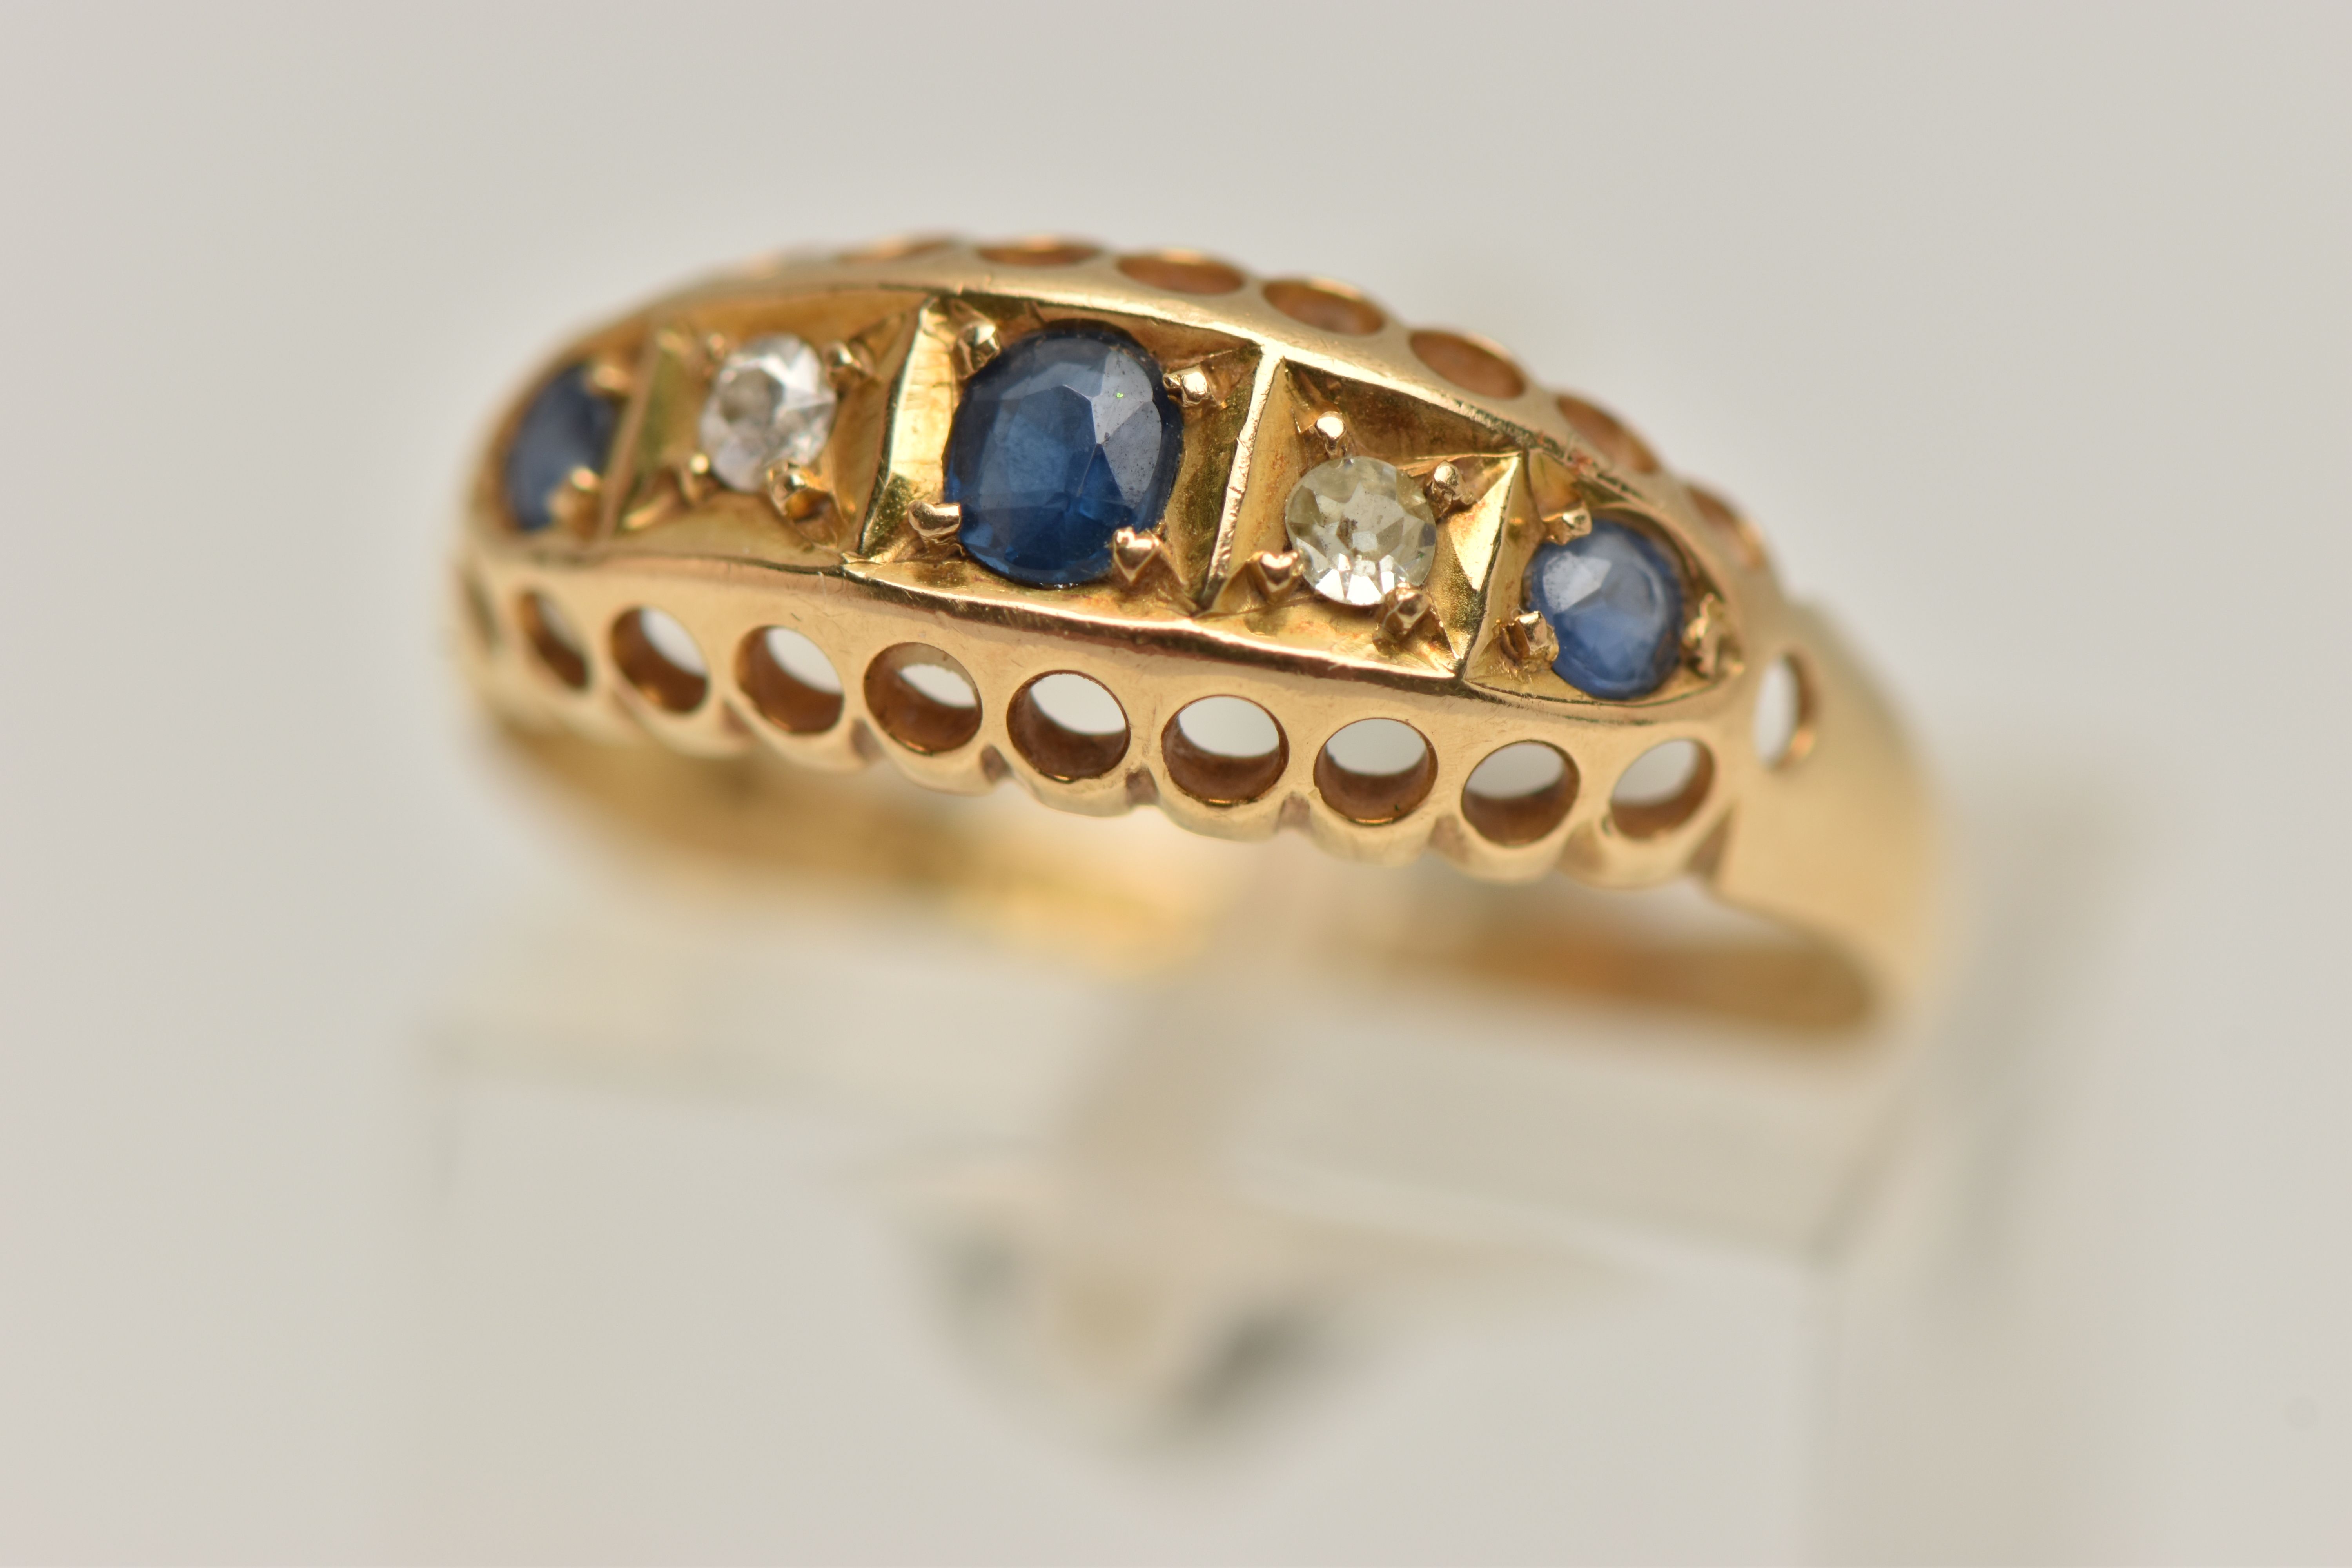 AN EARLY 20TH CENTURY 18CT GOLD BOAT RING, set with three circular cut blue sapphires interspaced